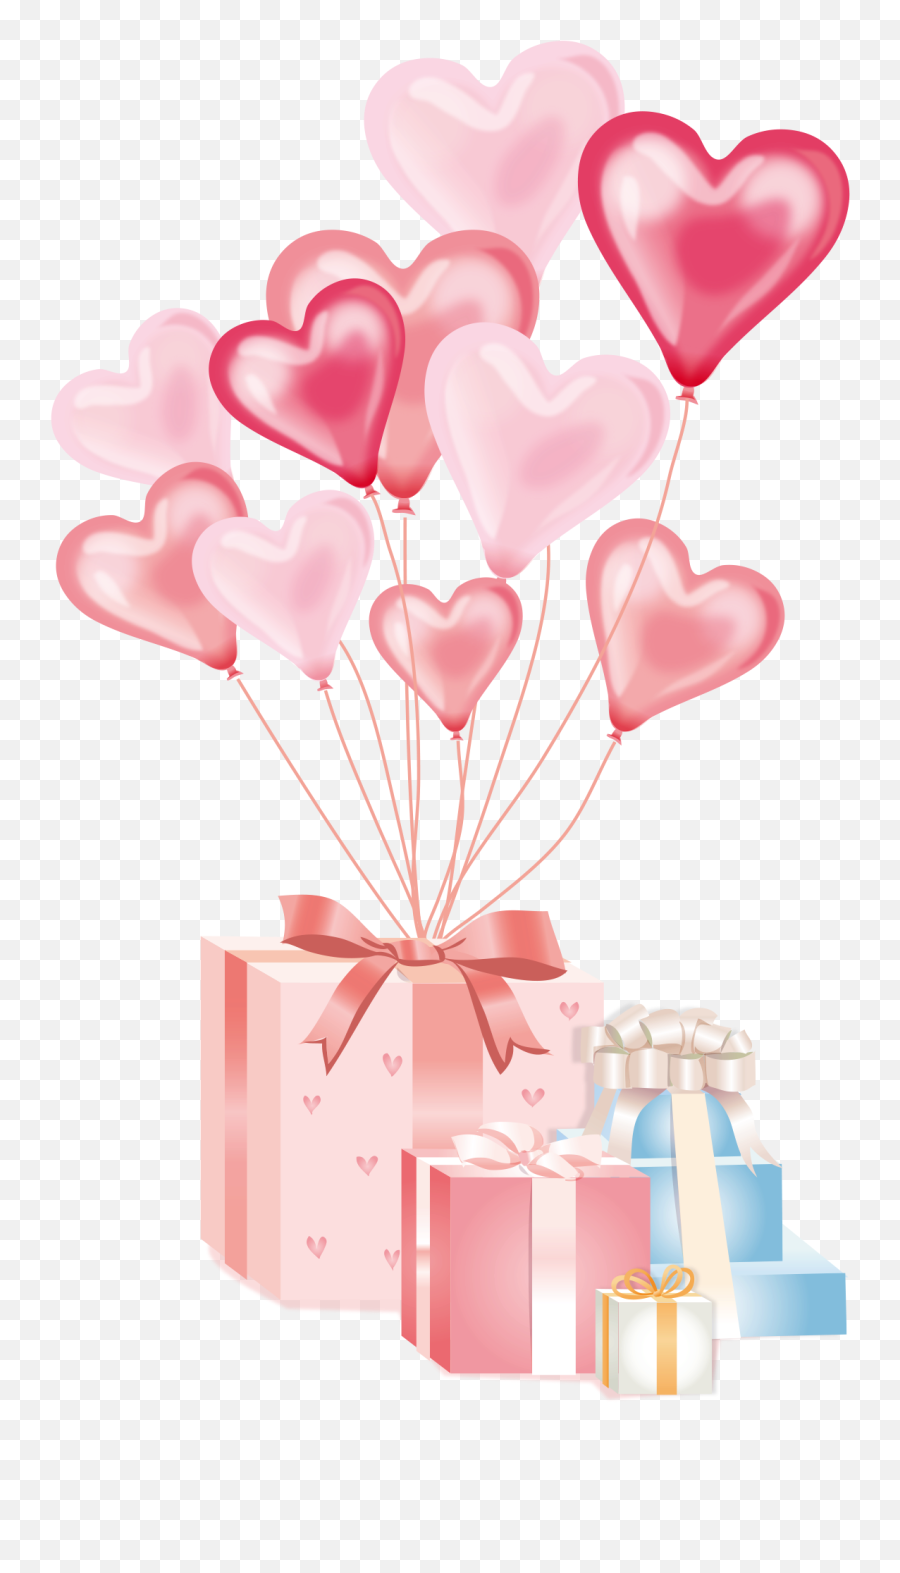 Hd Birthdaygift Png Image Free Download - Birthday Gift Pics Png,Birthday Presents Png